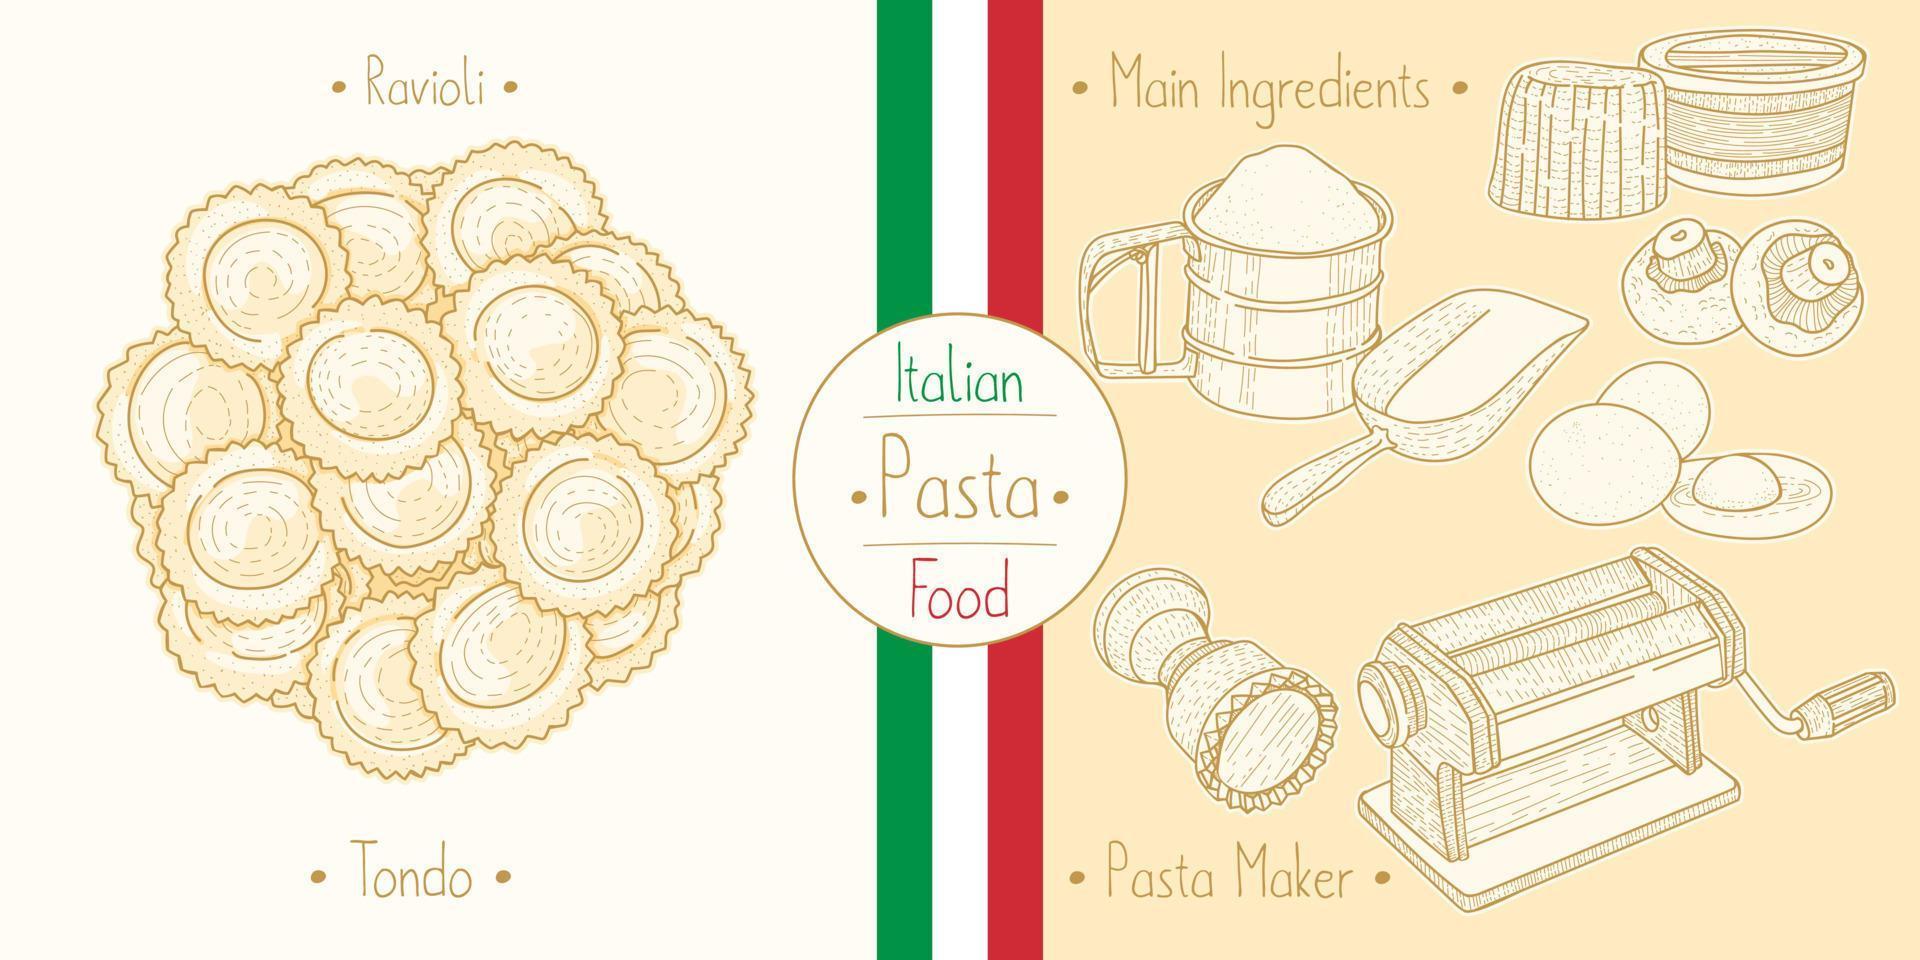 Italian Food Pasta with Filling Ravioli Tondo, sketching illustration in the vintage style vector